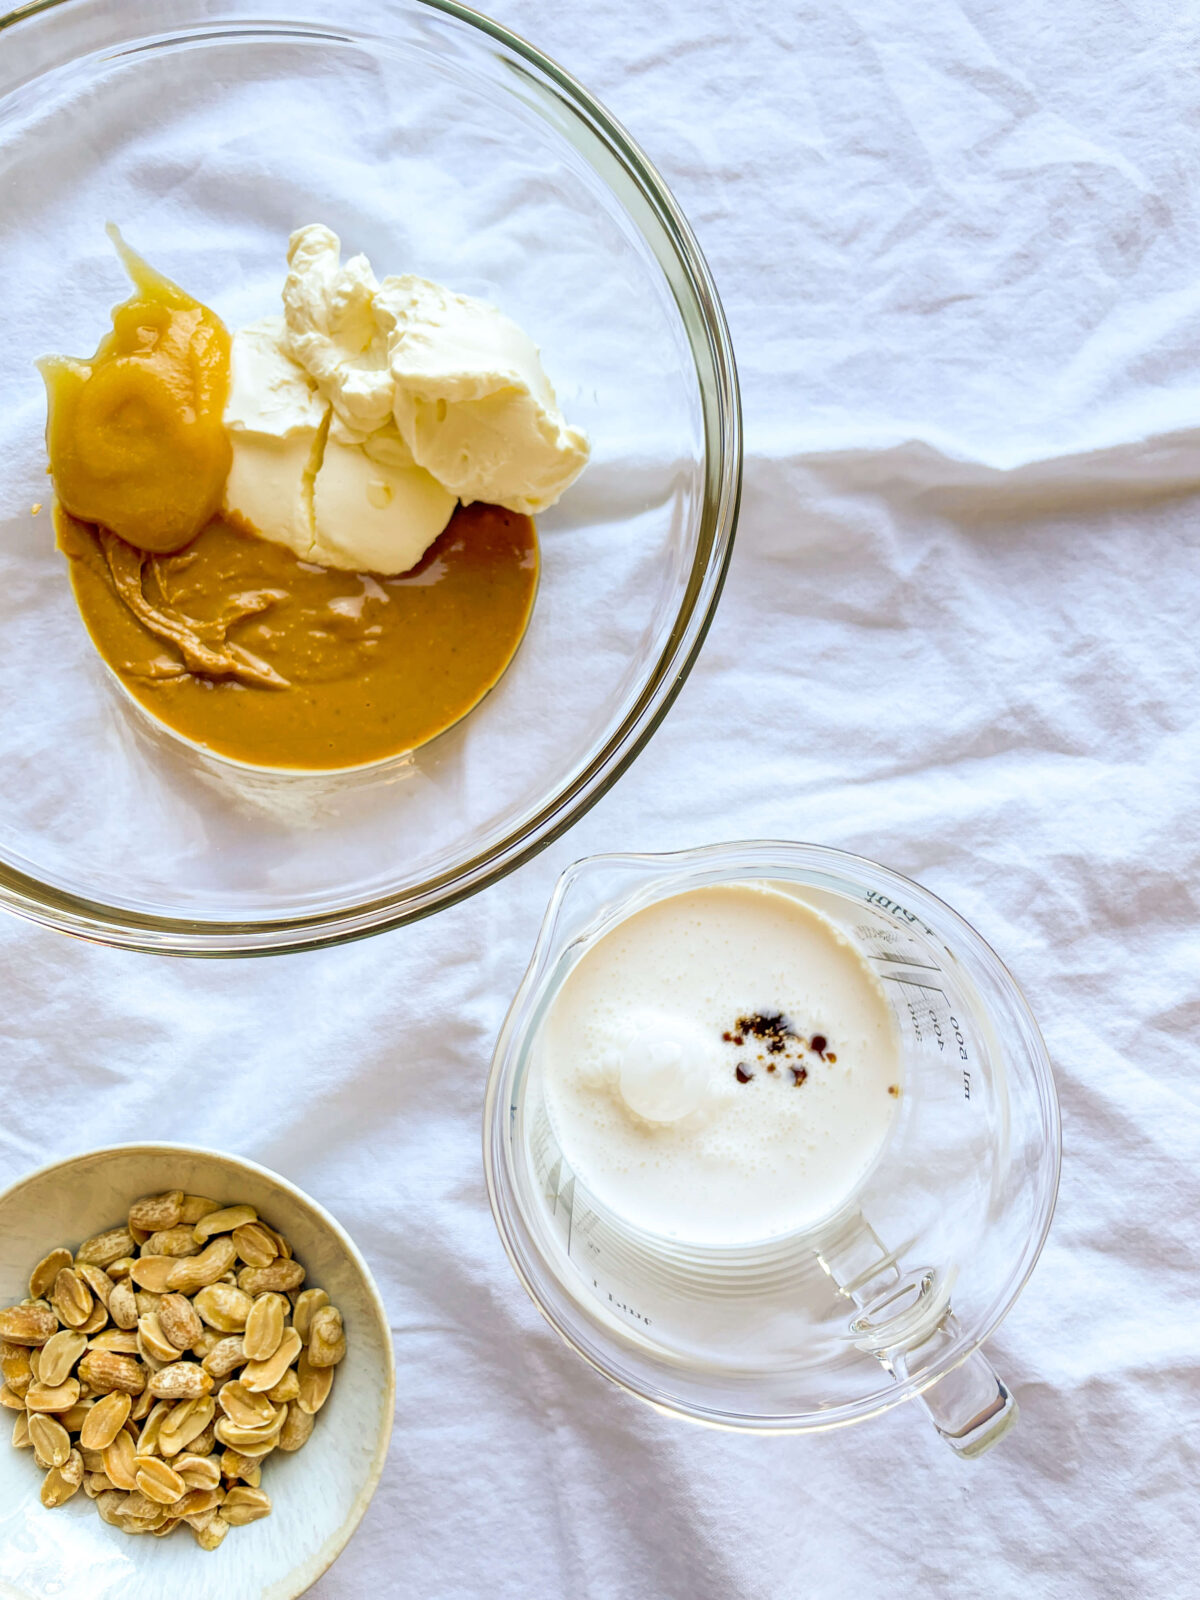 Image shows the ingredients required to make a Chocolate PB mousse: heavy whipped cream, honey, real vanilla extract, cream cheese, natural sugar-free peanut butter, salt, unsweetened chocolate, roasted peanuts.